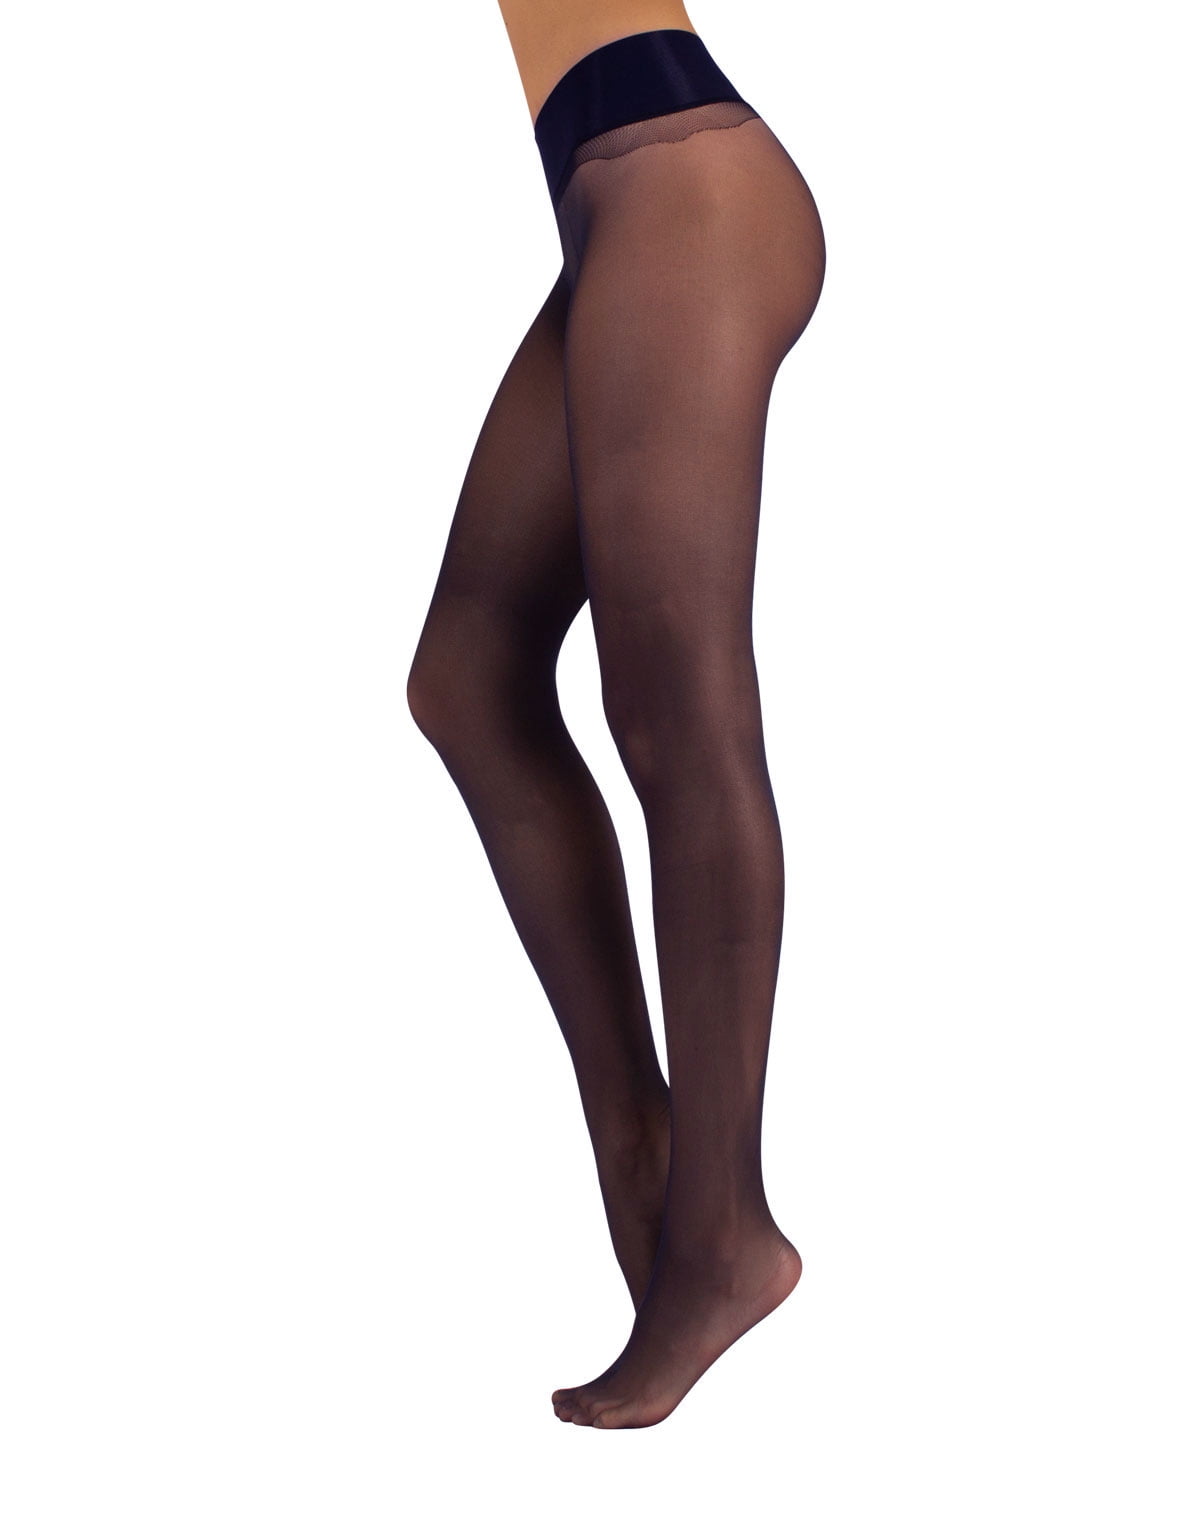 CALZITALY Seamless Tights No Seams Pantyhose with Lace Top 